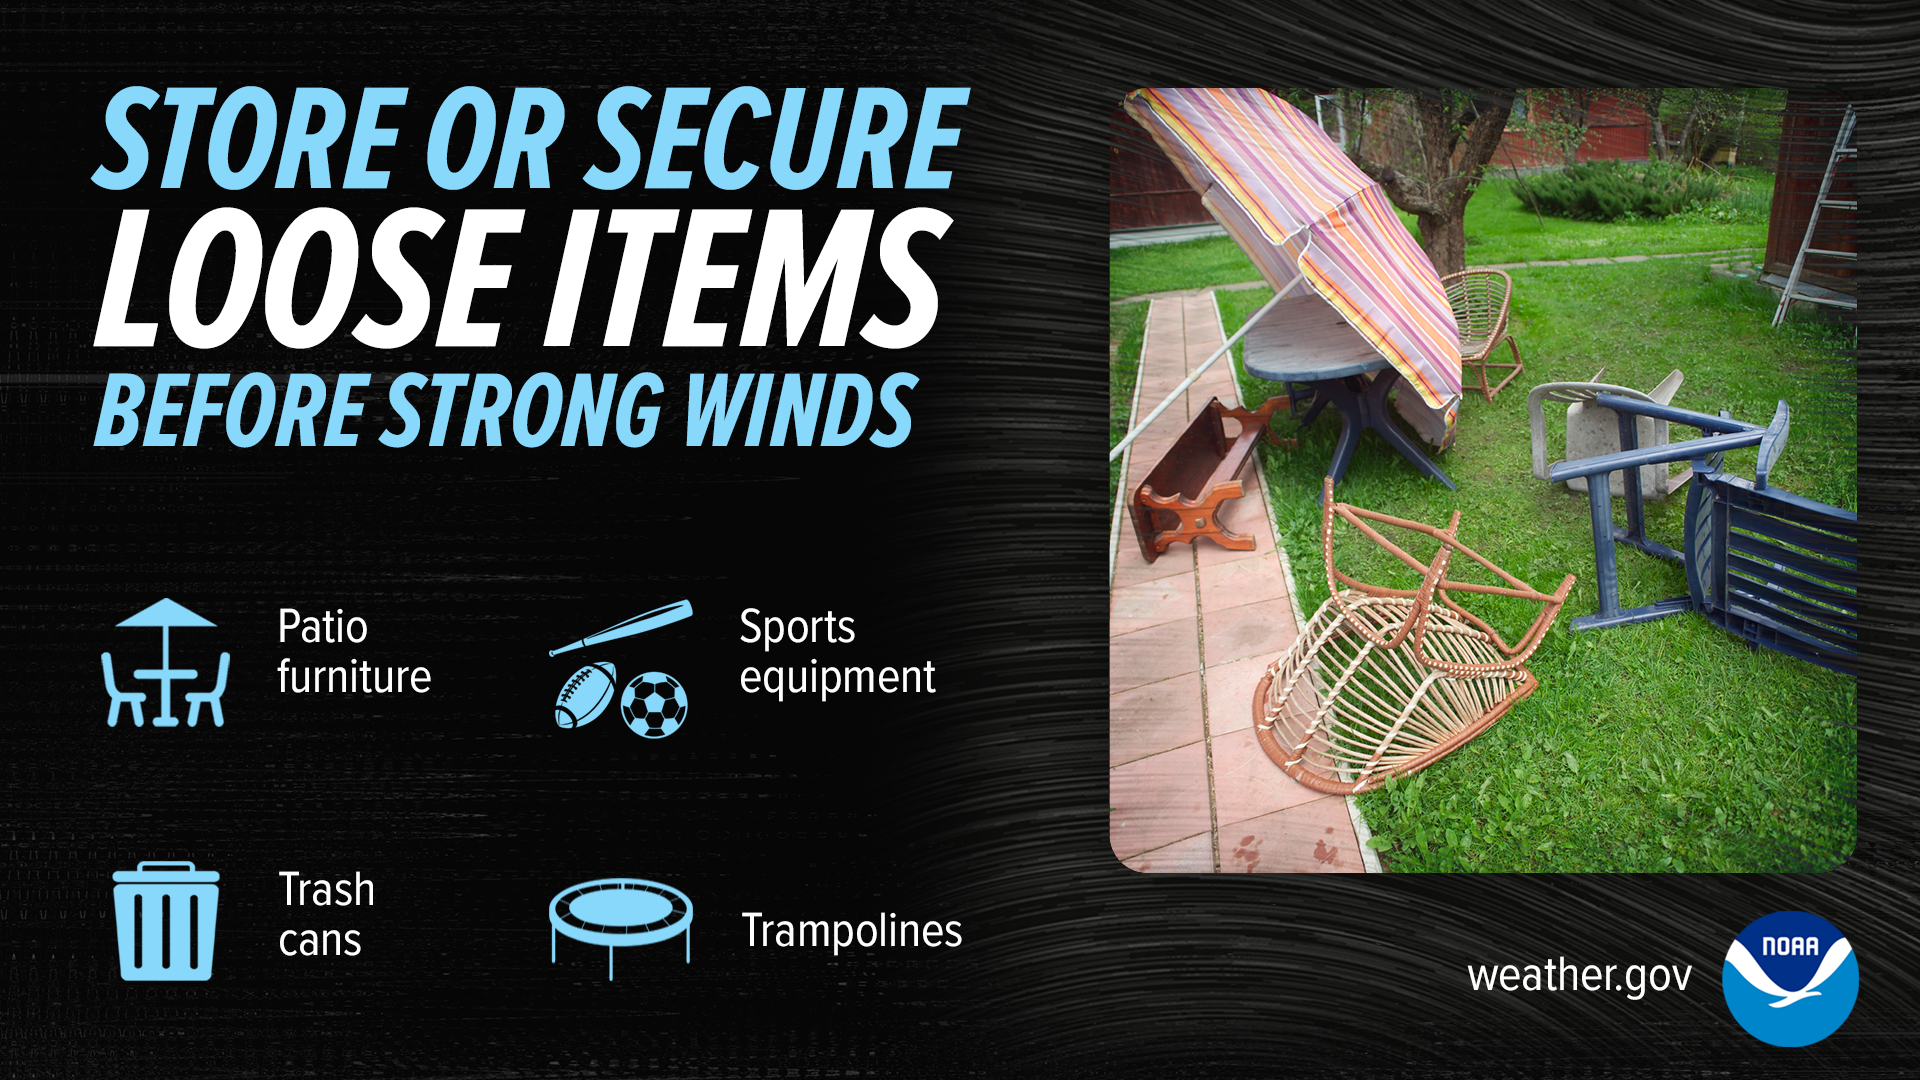 Store or secure loose items before strong winds: patio furniture, trash cans, sports equipment, trampolines.